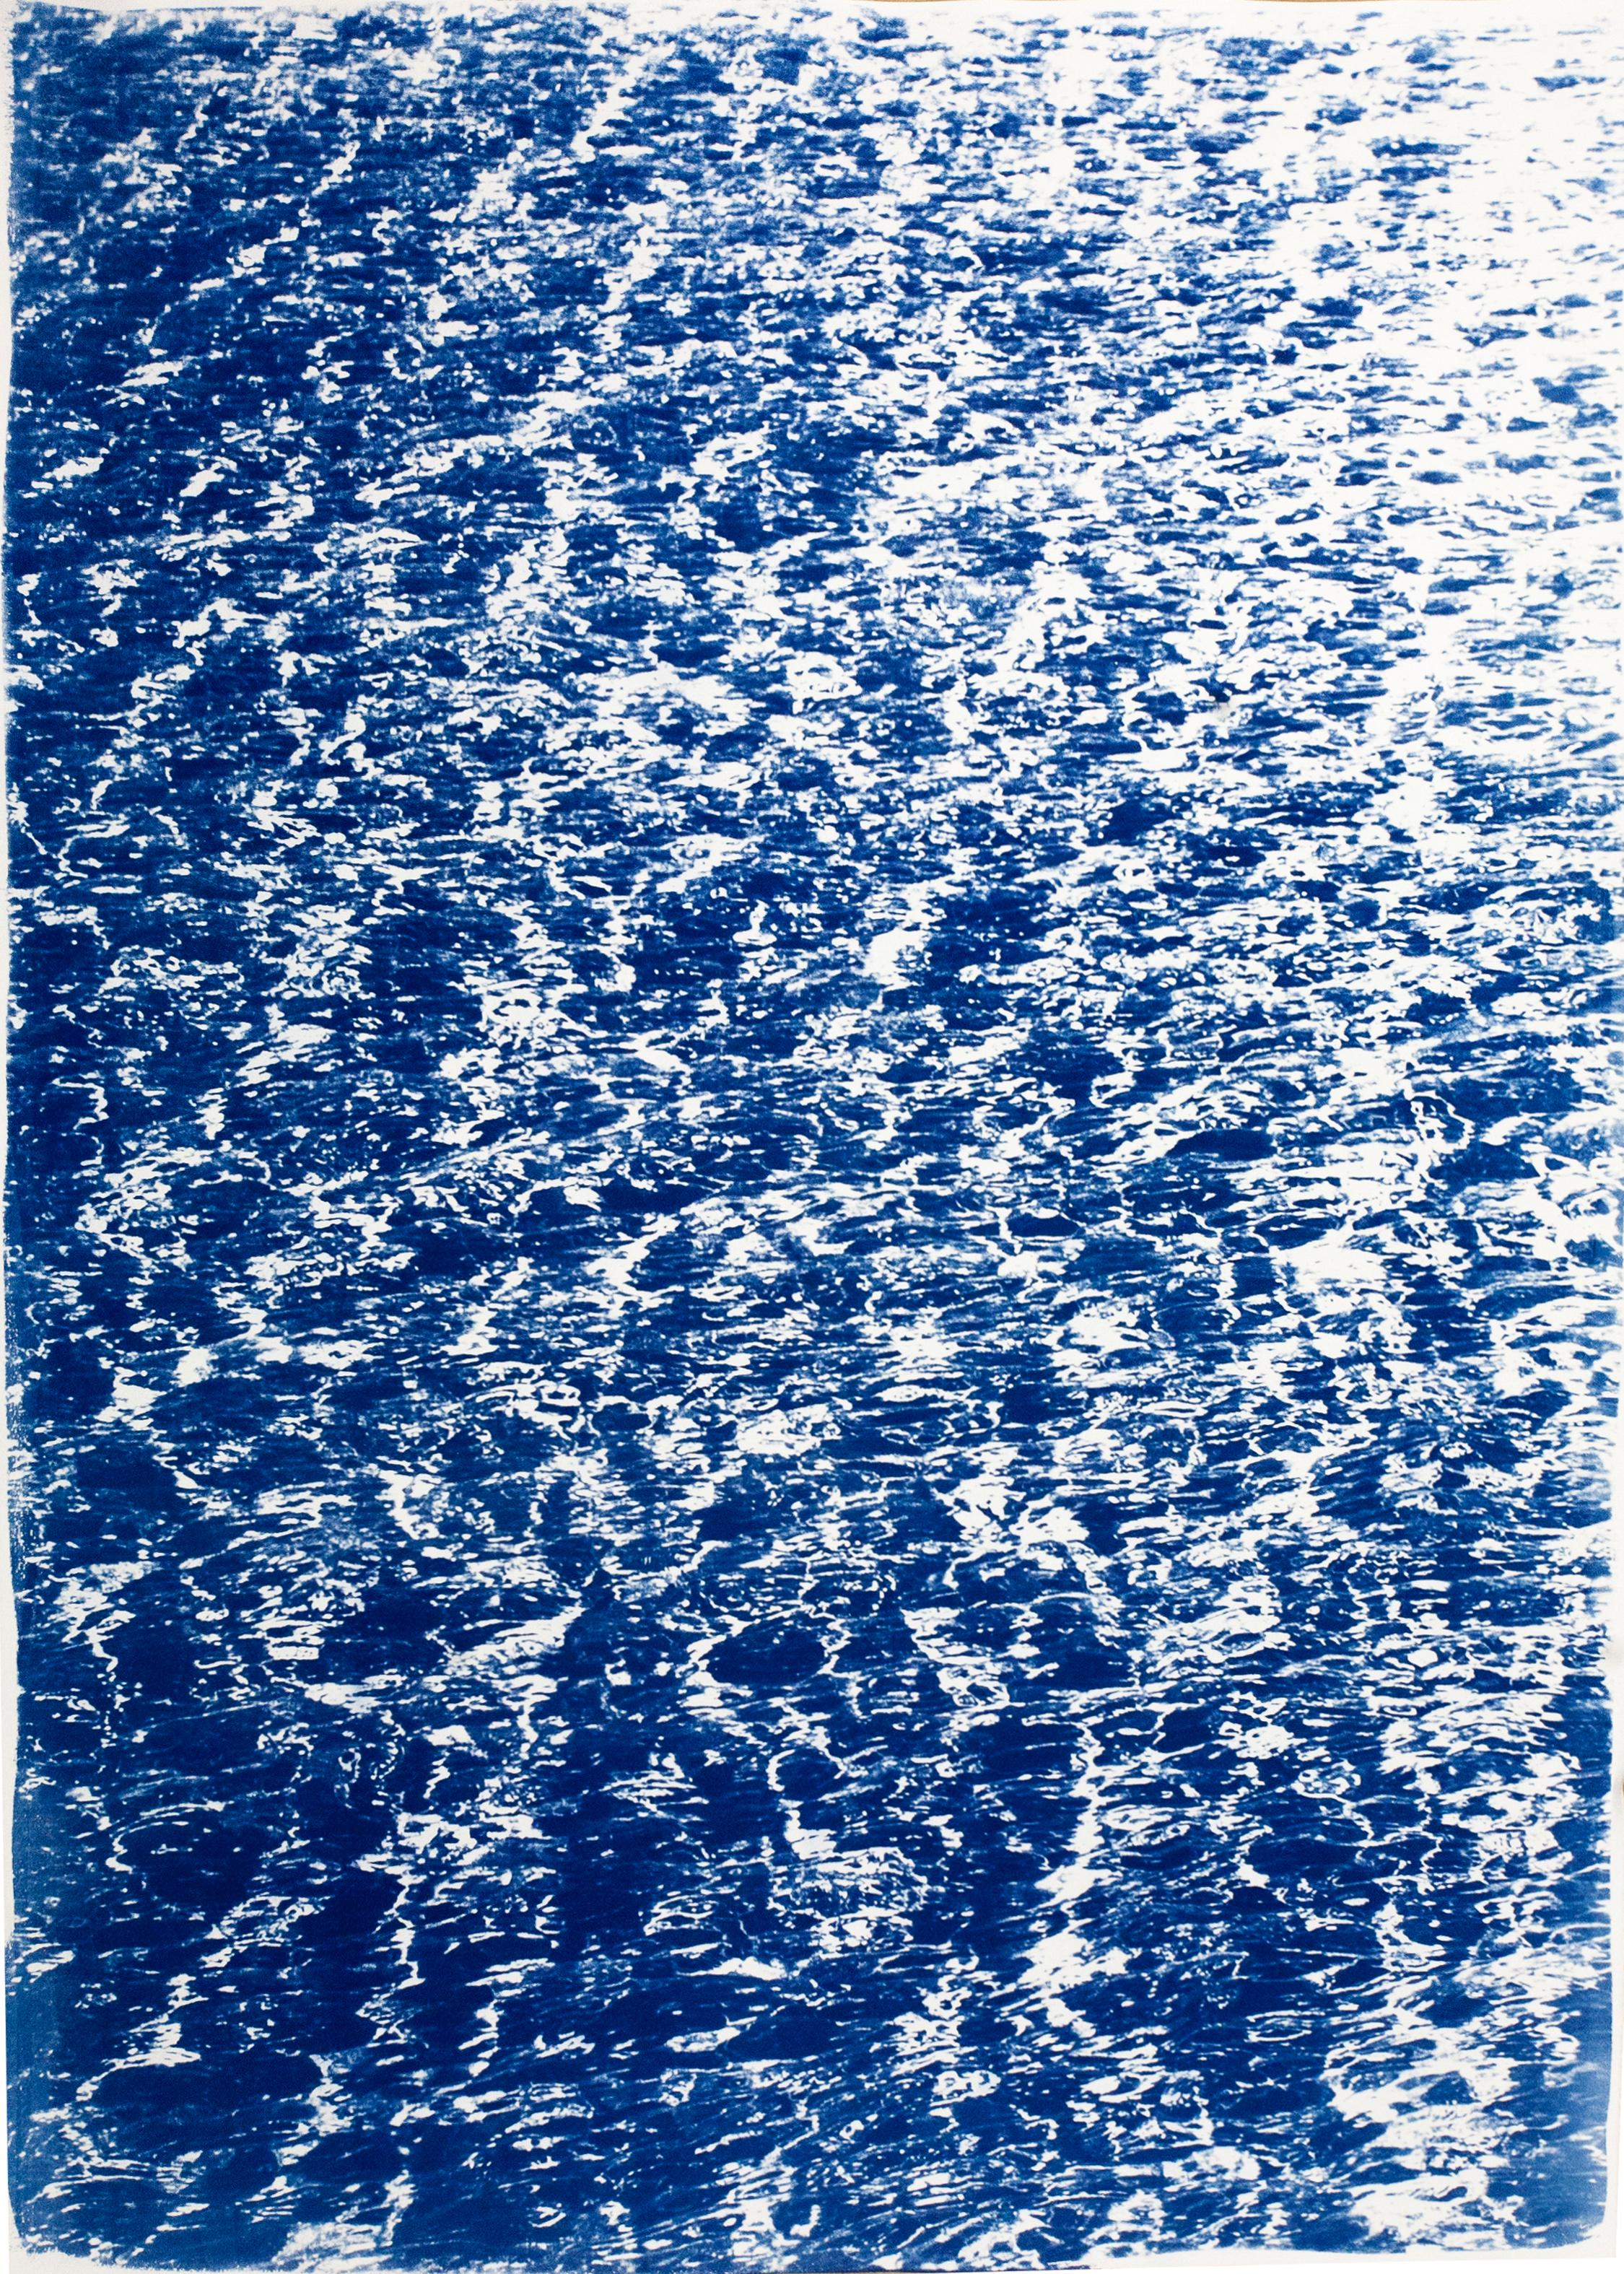 French Riviera Cove, Triptych, Cyanotype on Watercolor Paper, 100x210cm, Ocean - Impressionist Photograph by Kind of Cyan